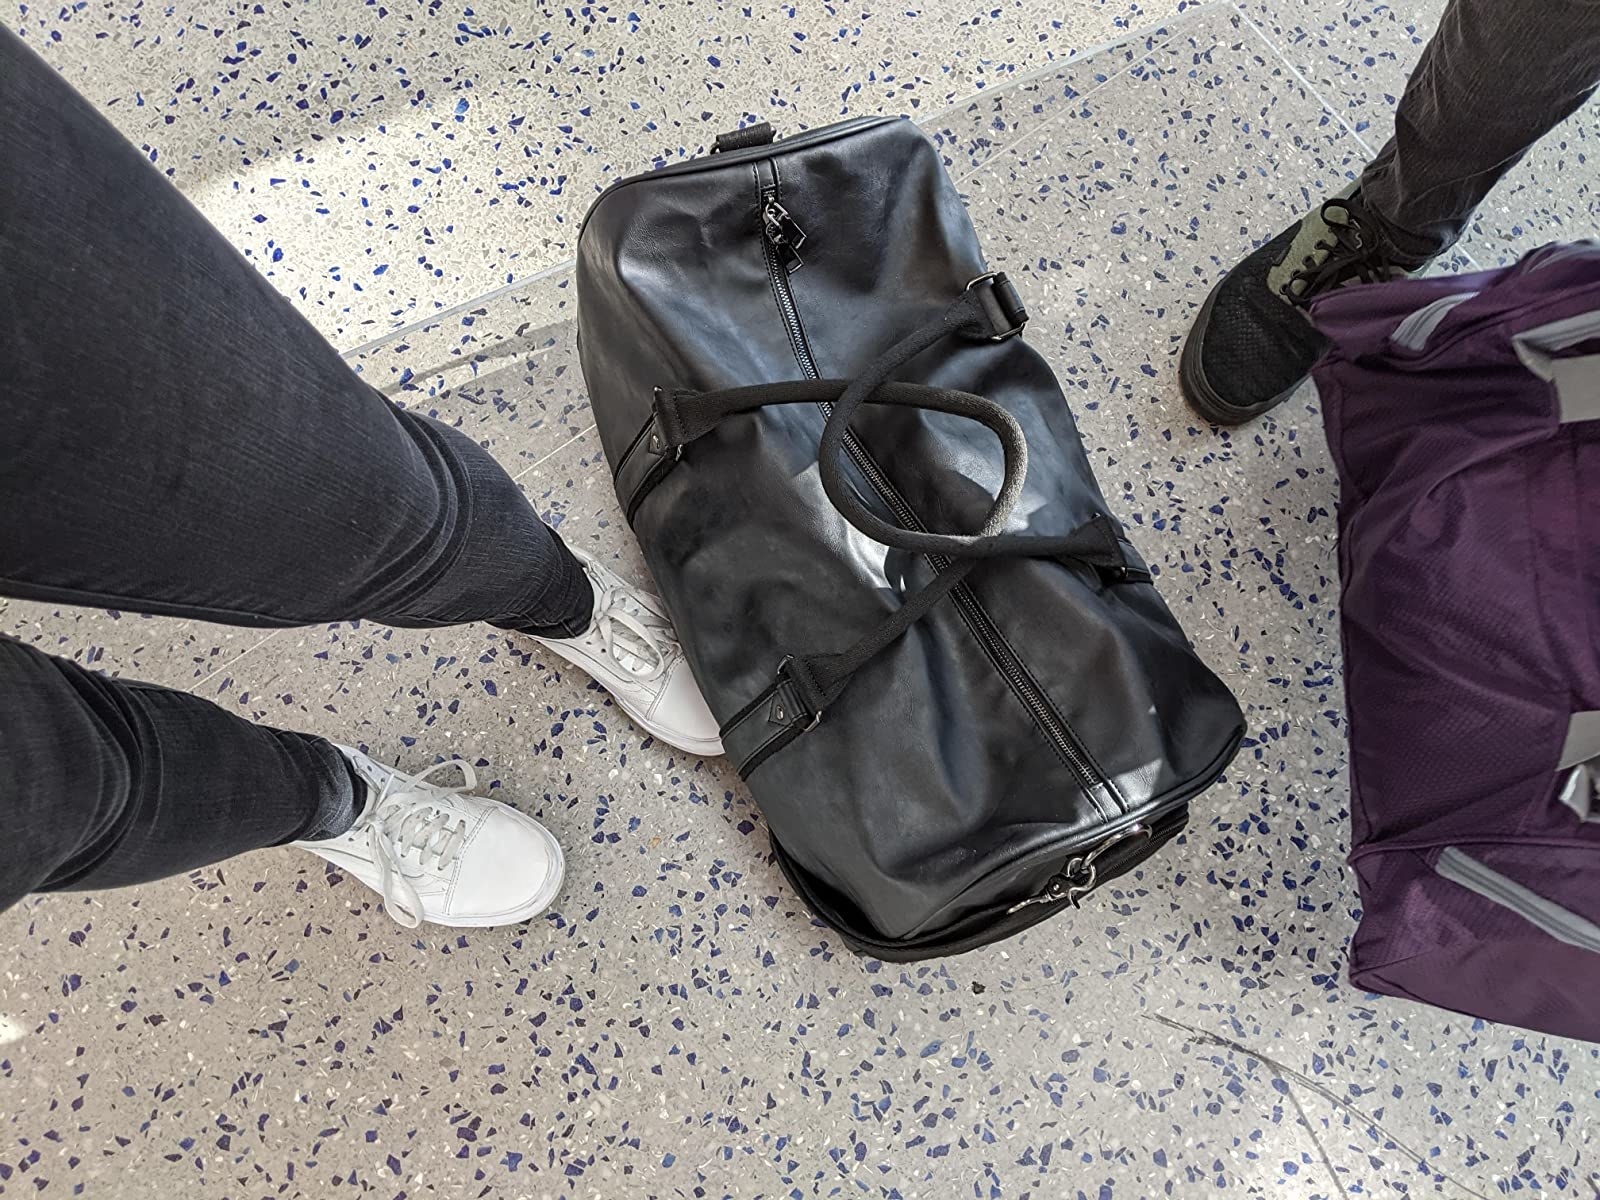 reviewer image of the black weekender bag on the ground by their feet